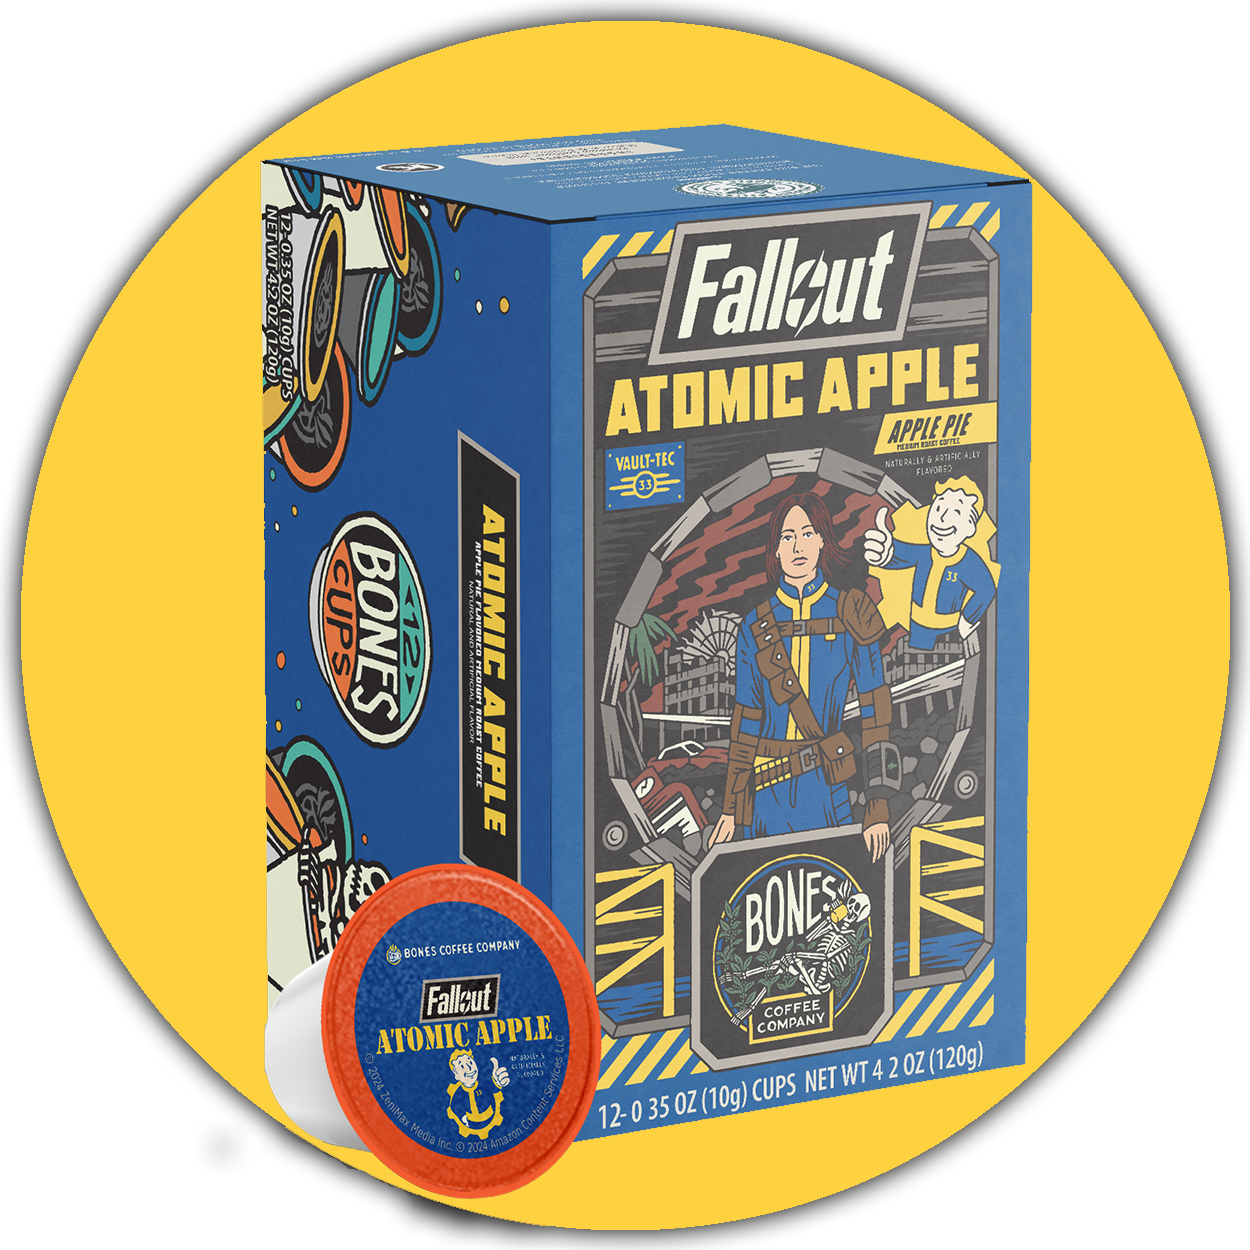 A box of Bones Cups flavored coffee inspired by Fallout named Atomic Apple. Its flavor is apple pie. On the art is Lucy from the Fallout show, and behind the box is a yellow circle.